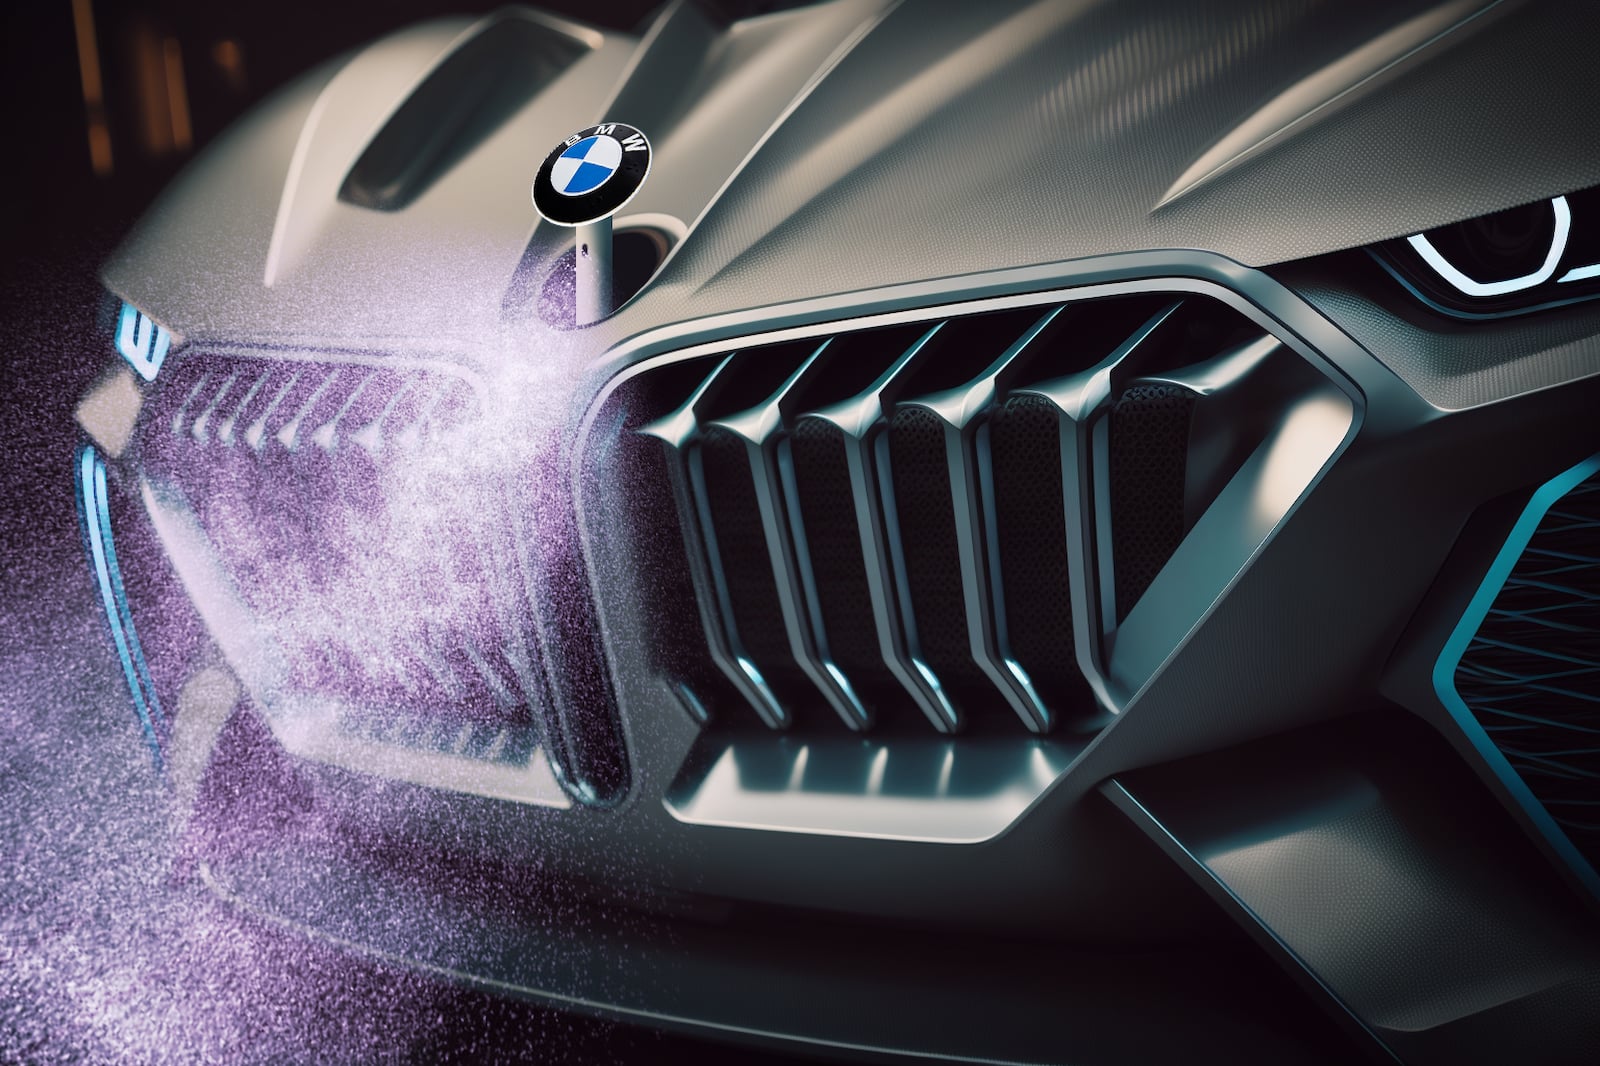 BMW is applying for a patent on exterior car freshener